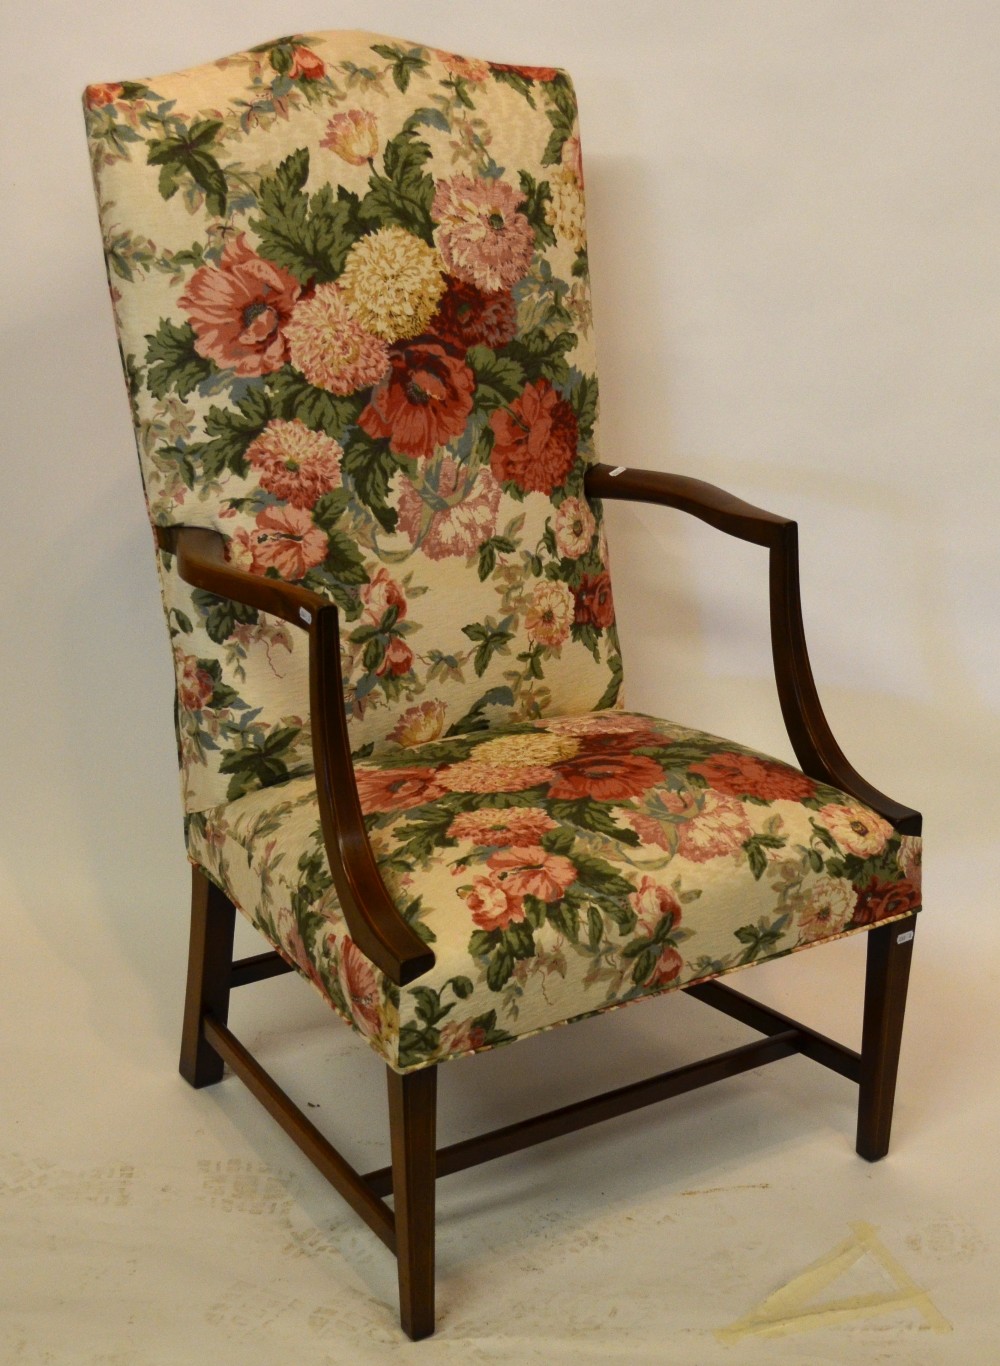 An early 19th century mahogany framed upholstered open elbow chair in Sanderson floral print